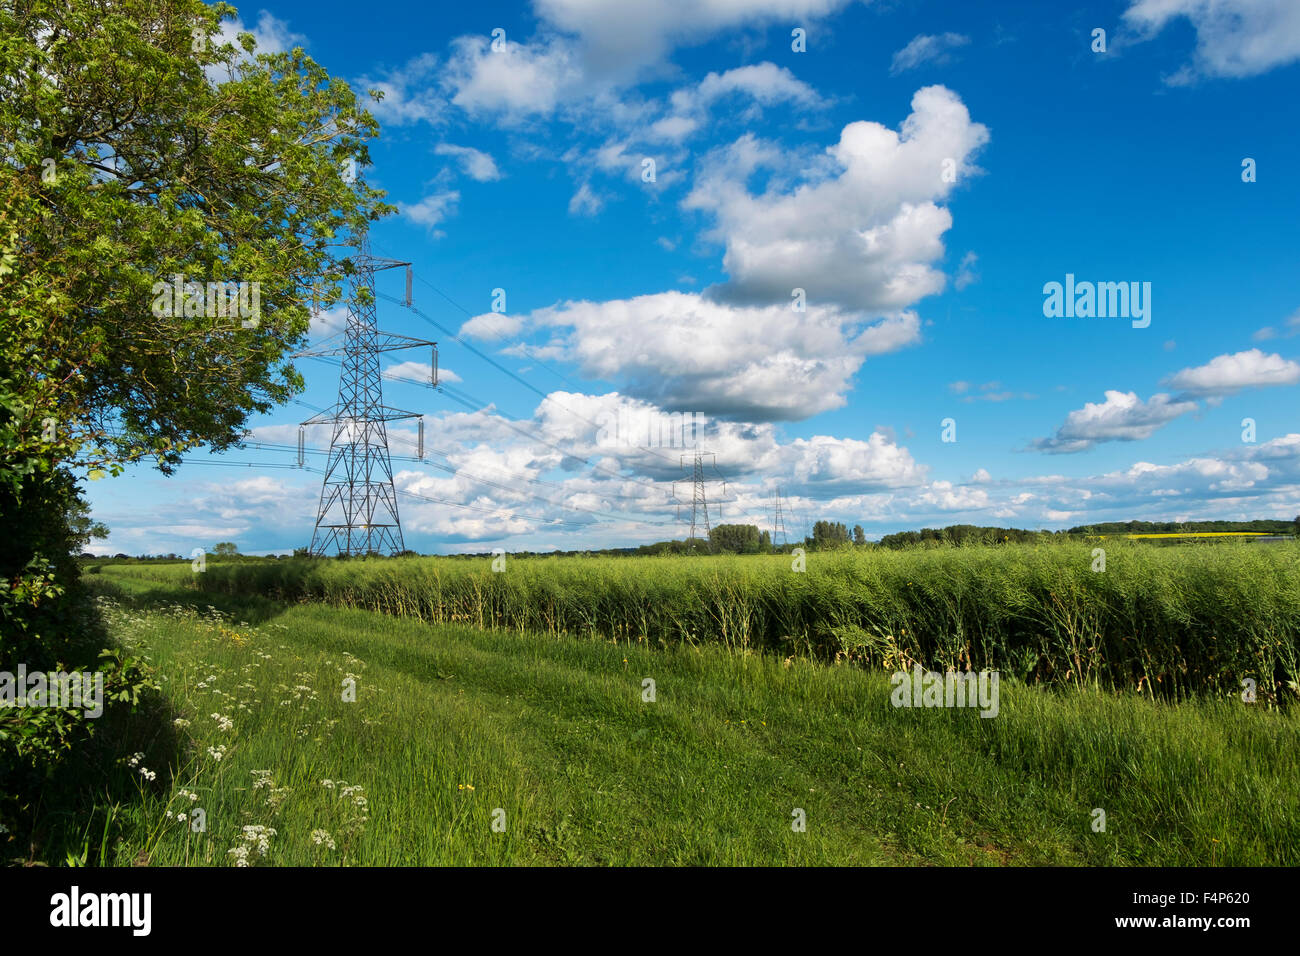 Pylon carrying electricity cables over the countryside in the Cotswolds, Gloucestershire, UK Stock Photo